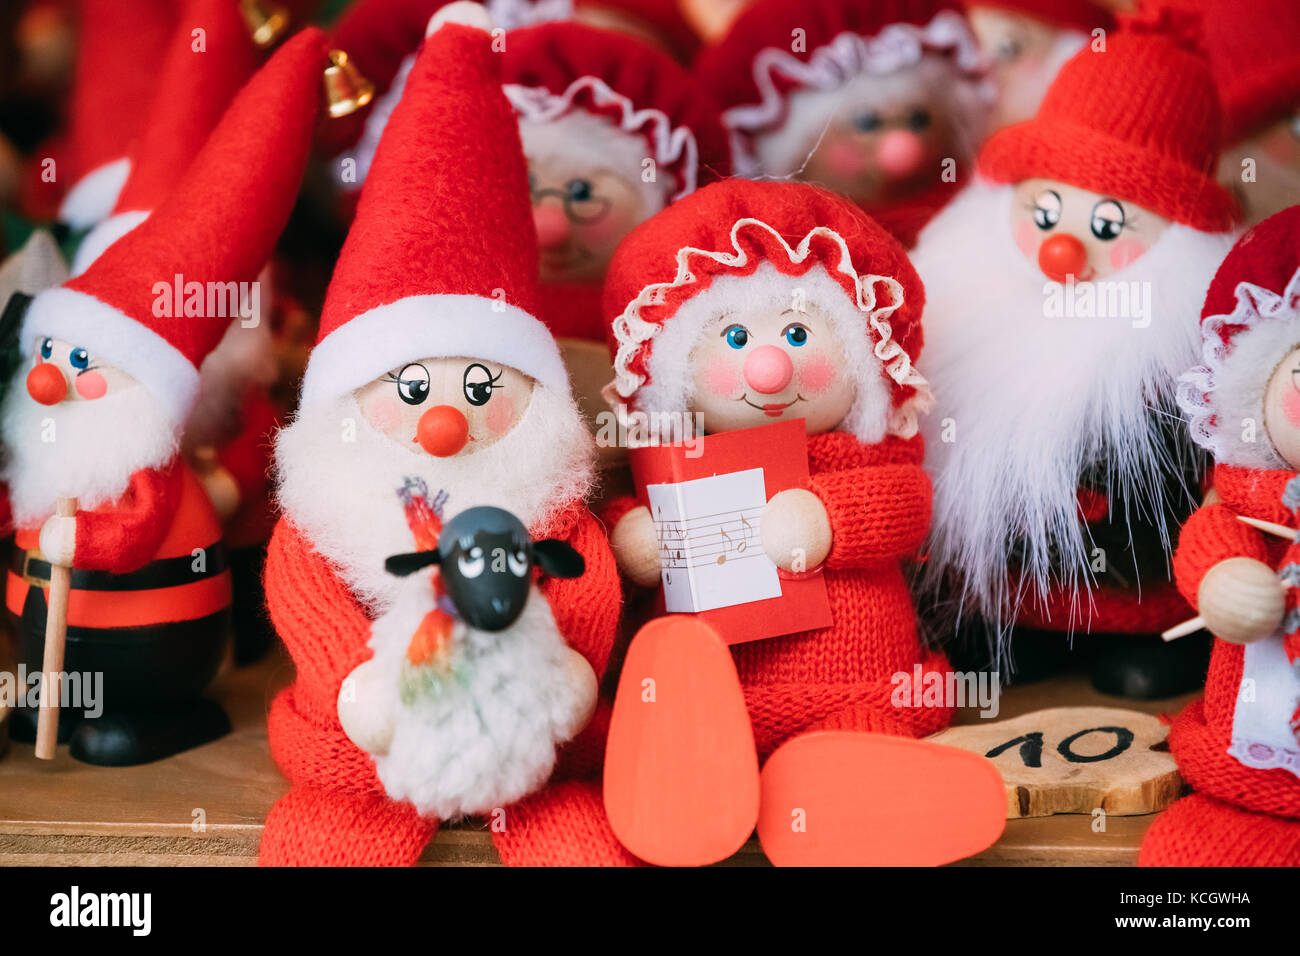 Traditional Souvenirs Santa Claus Dolls Toys At European Winter Christmas Market. New Year Wooden Souvenir From Europe. Stock Photo